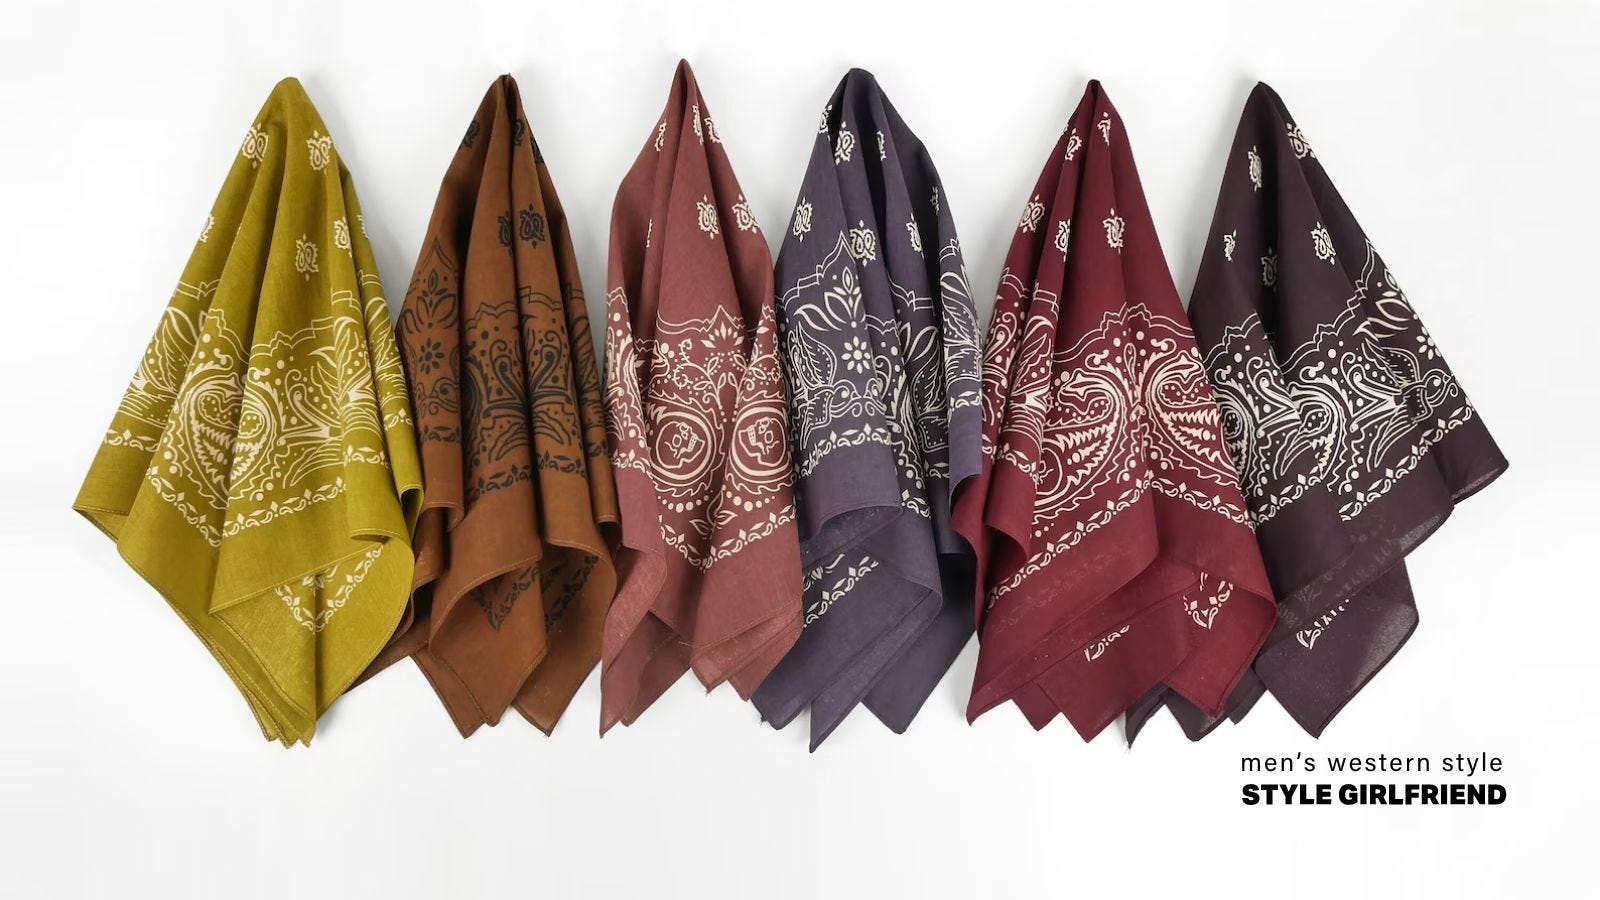 row of colorful patterned bandanas hanging on hooks. from left to right: yellow, dark brown, light brown, purple, red, brown